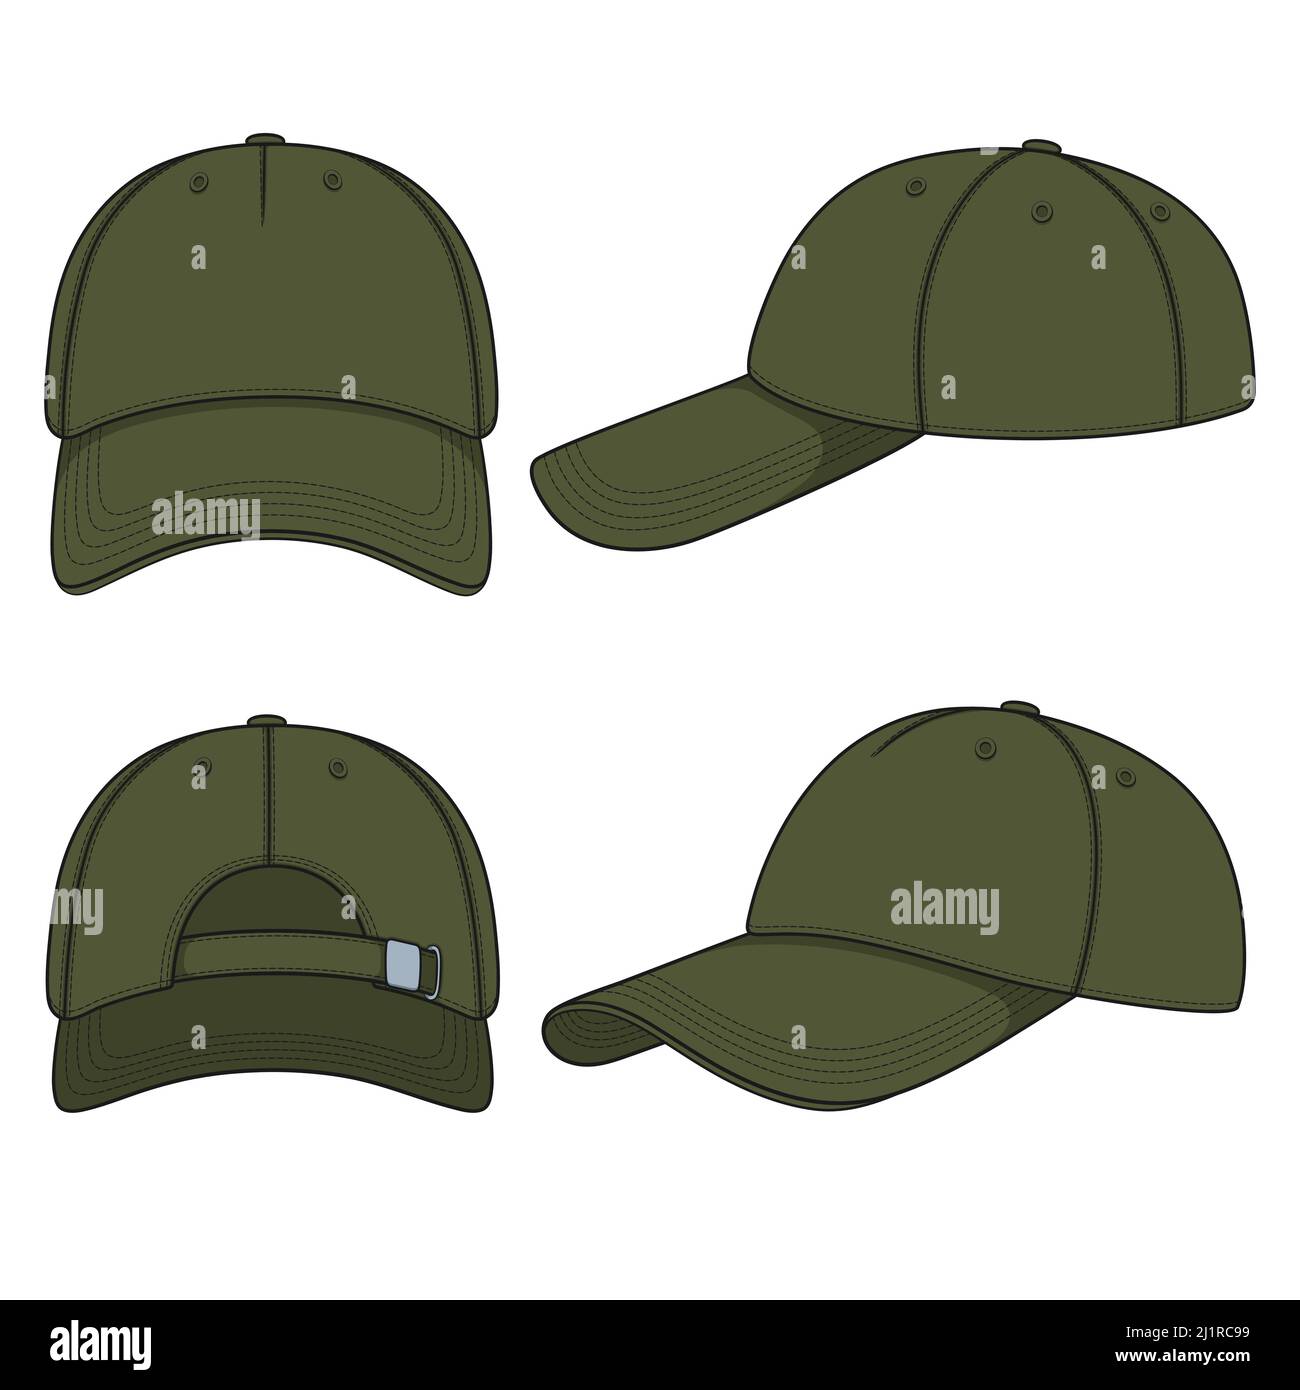 Set of color illustrations with khaki baseball cap. Isolated vector objects on white background. Stock Vector